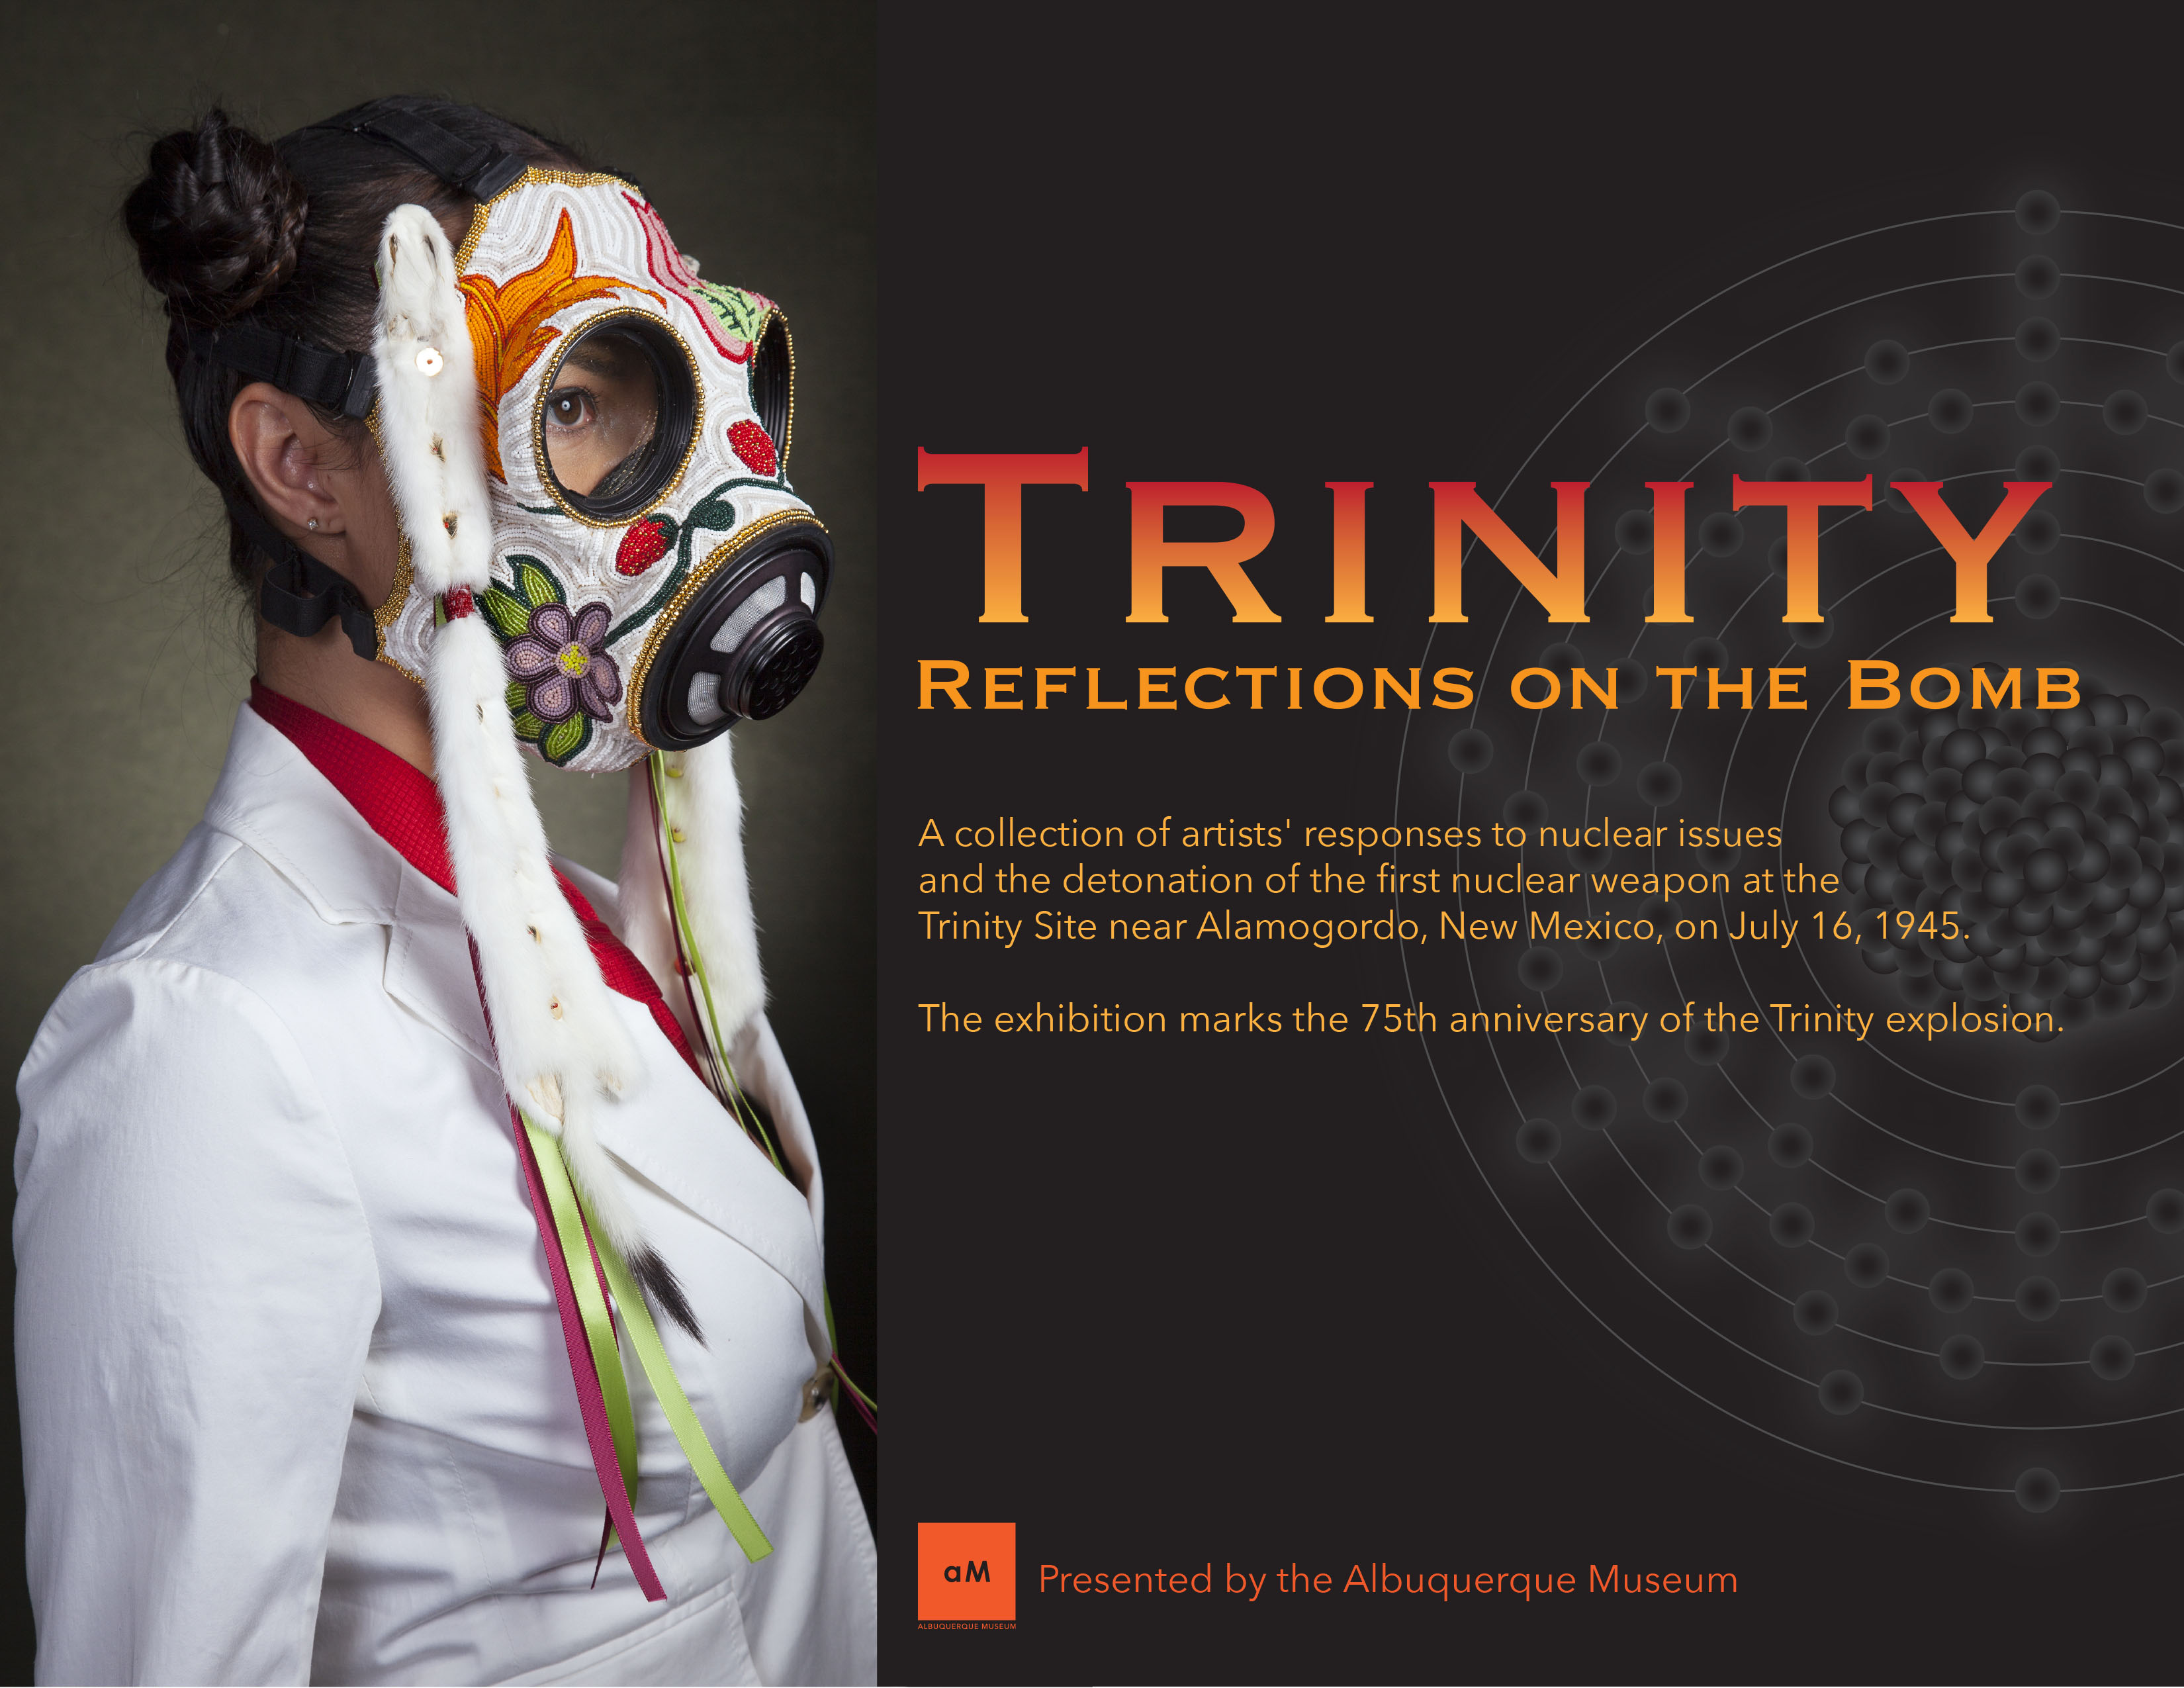 Trinity: Reflections on the Bomb. A collection of artists' responses to nuclear issues and the detonation of the first nuclear weapon at the Trinity Site near Alamogordo, New Mexico, on July 16, 1945. Presented by the Albuquerque Museum.